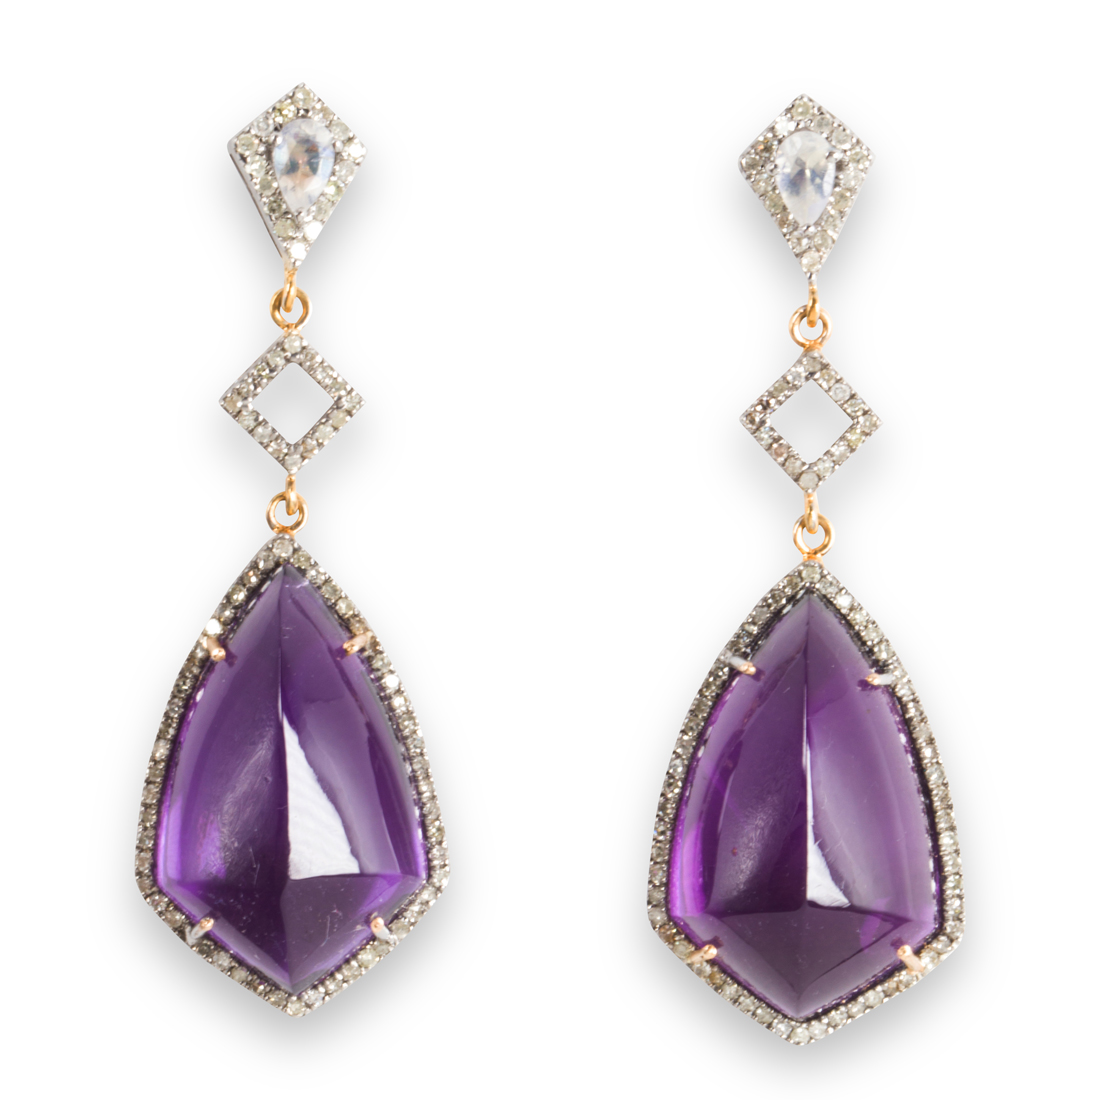 A PAIR OF AMETHYST MOONSTONE AND 3a225f